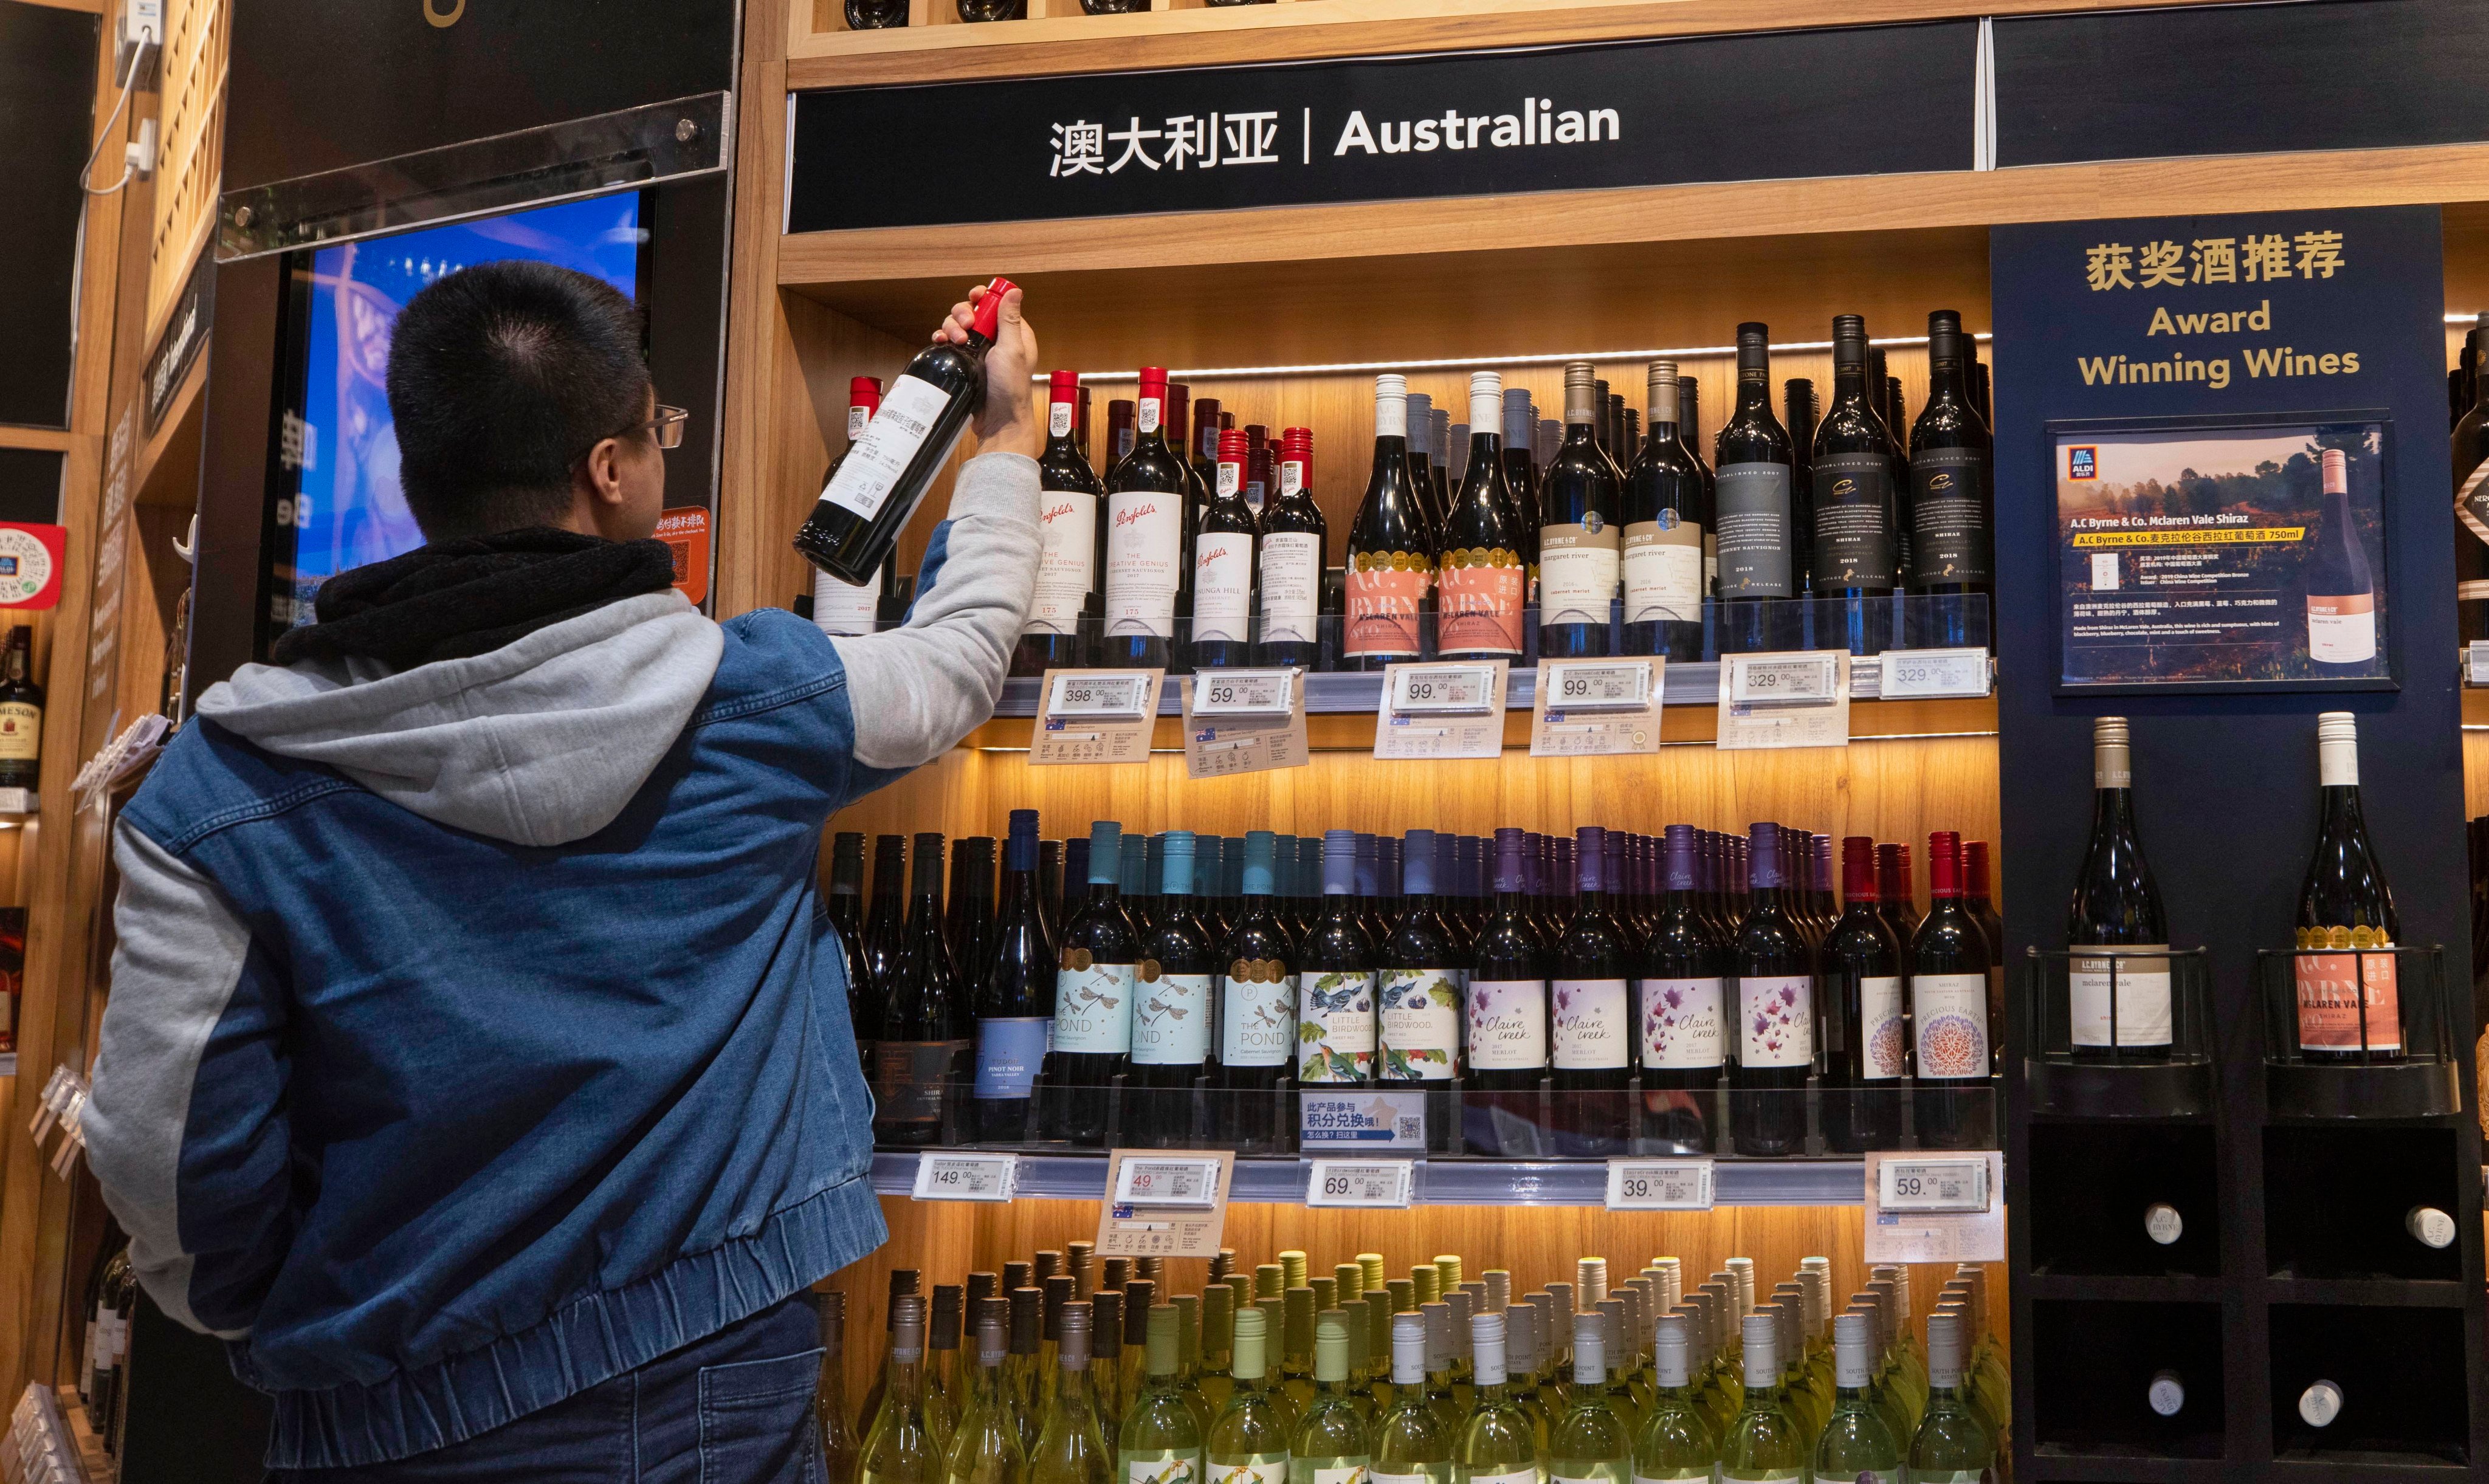 China has been lifting trade barriers on other goods as relations improve and Australian officials and industry expect a review of the wine tariffs begun by Beijing last year will lead to their removal next month. Photo: EPA-EFE